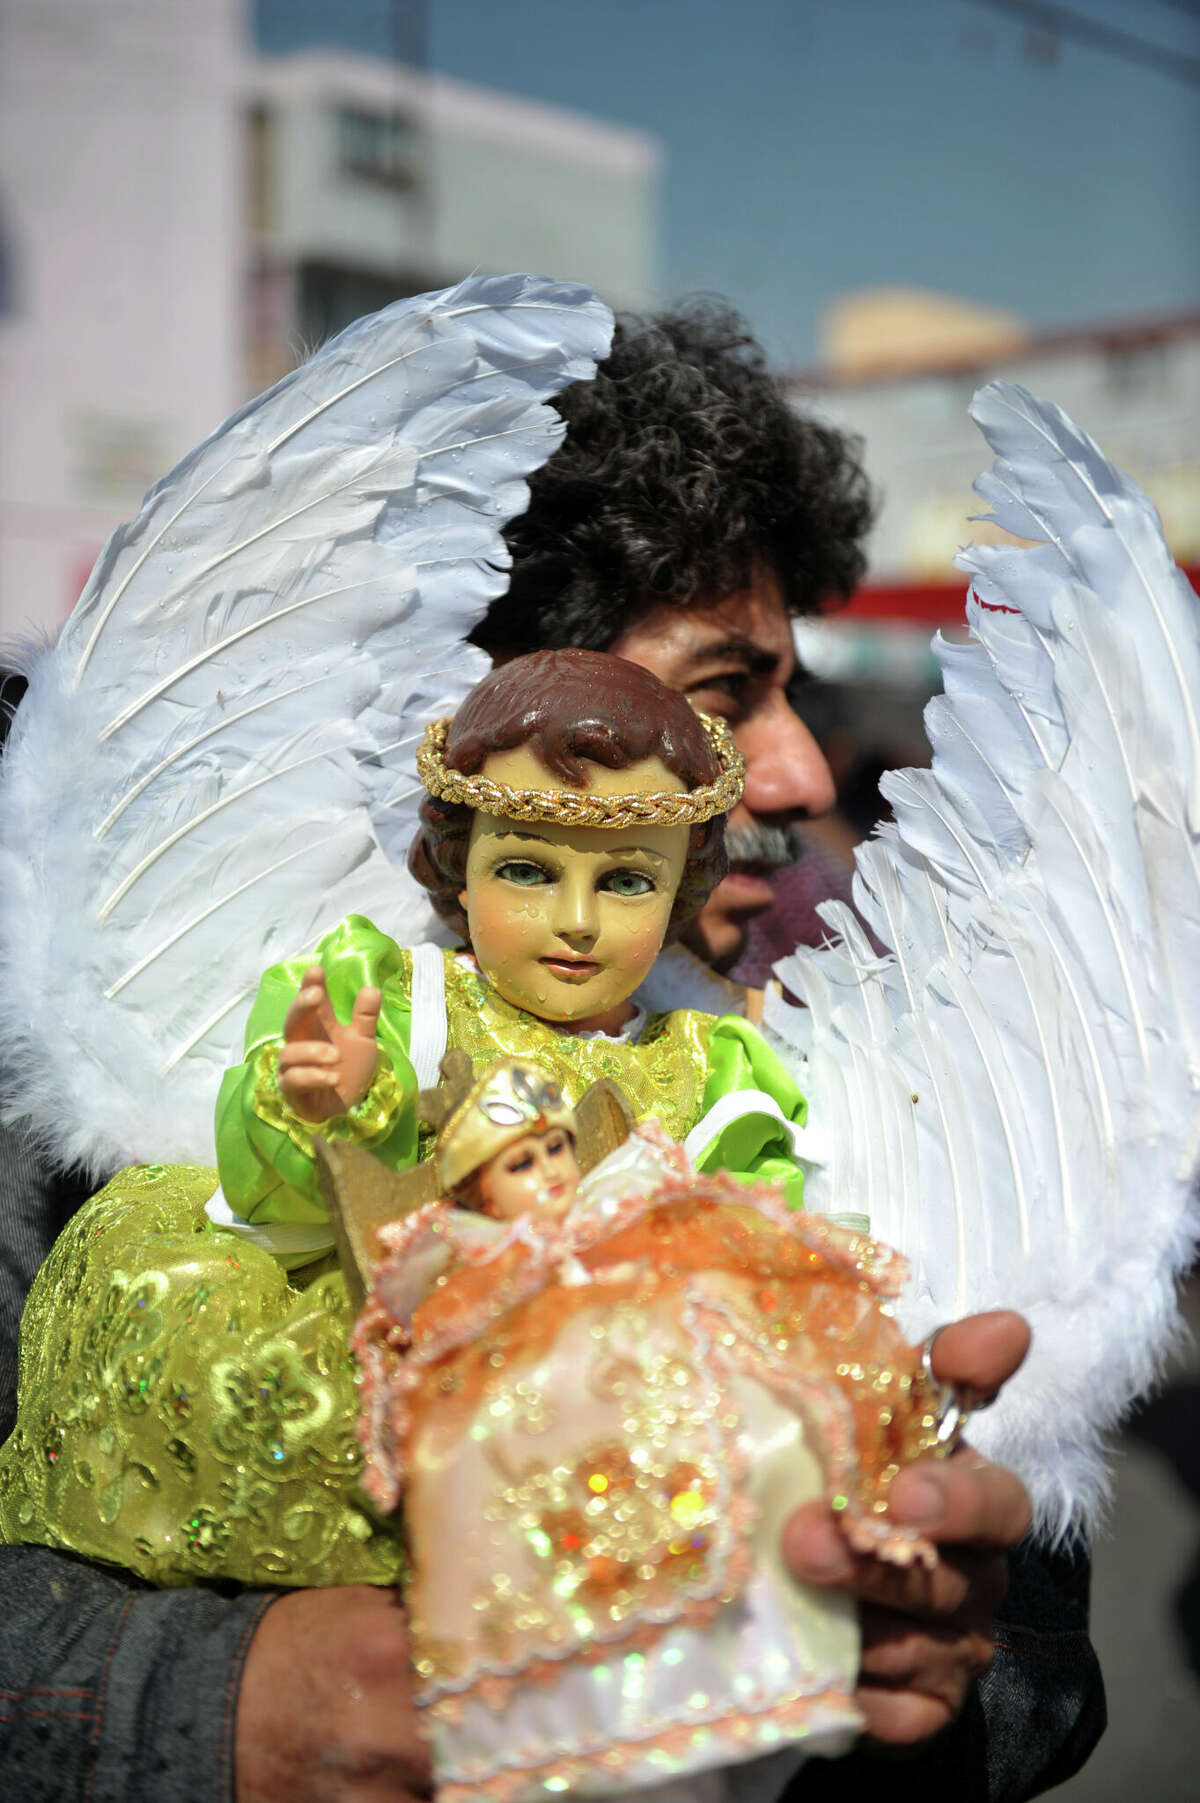 A man carries a Baby Jesus at Candelaria neighbourhood in Mexico City, during Candlemas Day (Dia de la Candelaria), on February 2, 2012. Candlemas or the Feast of the Purification, falls forty days after Christmas and is celebrated by Catholics as the presentation of Christ at the Temple. 